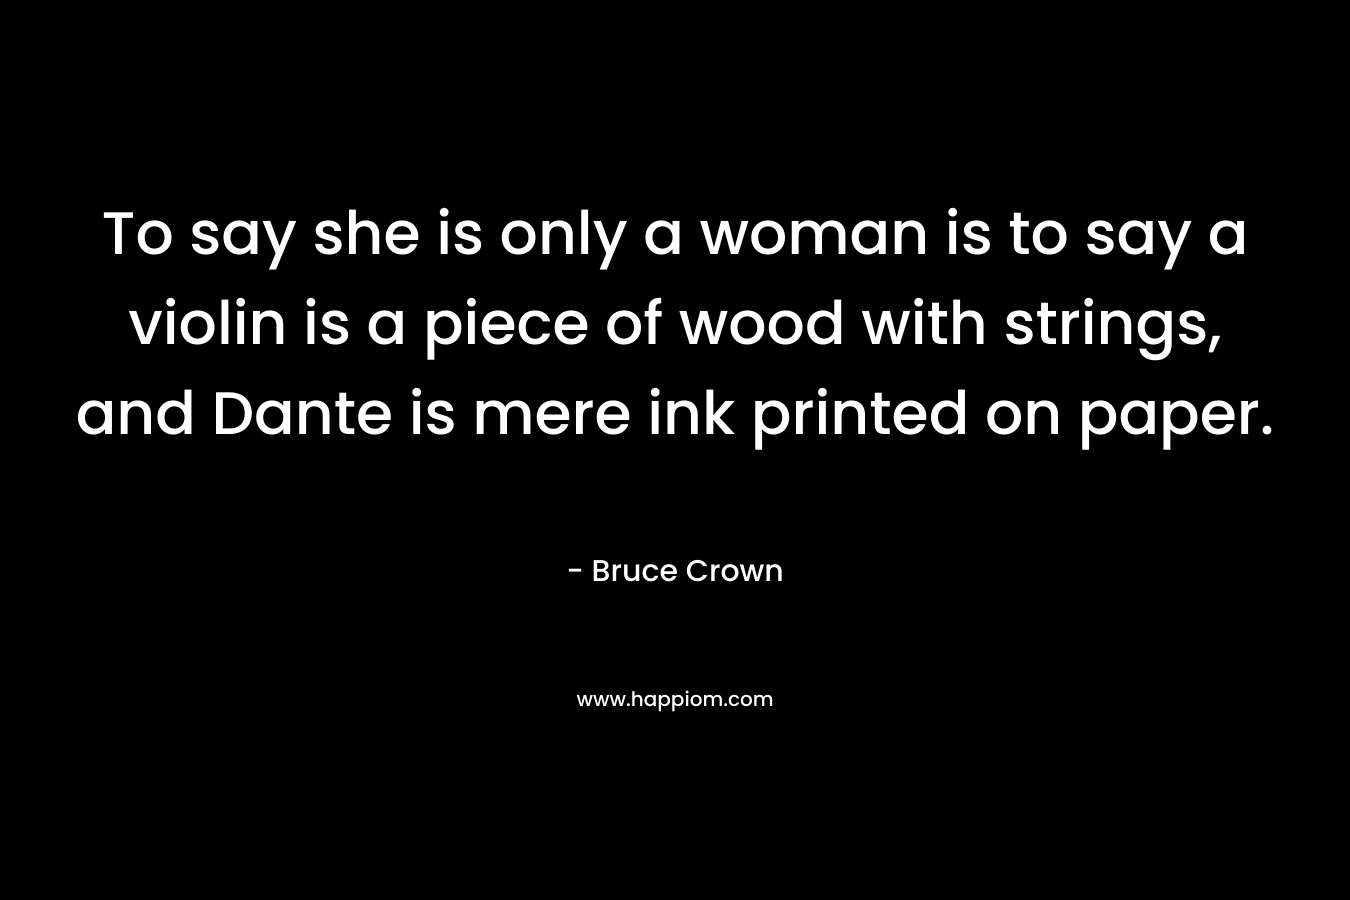 To say she is only a woman is to say a violin is a piece of wood with strings, and Dante is mere ink printed on paper. – Bruce Crown